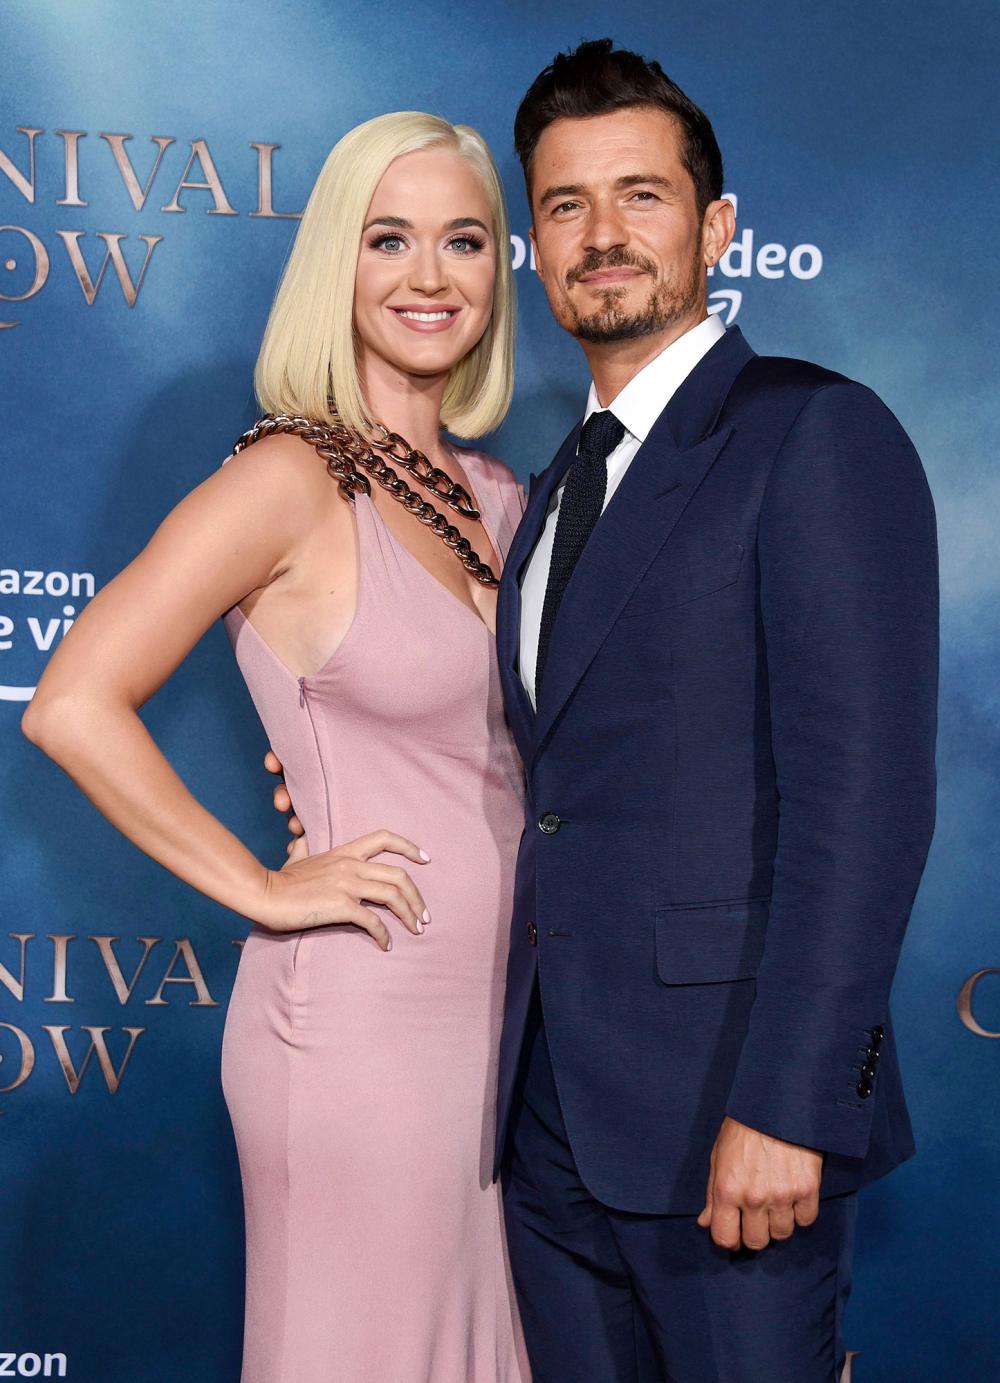 Katy Perry and Orlando Bloom Are Having a Spring Wedding